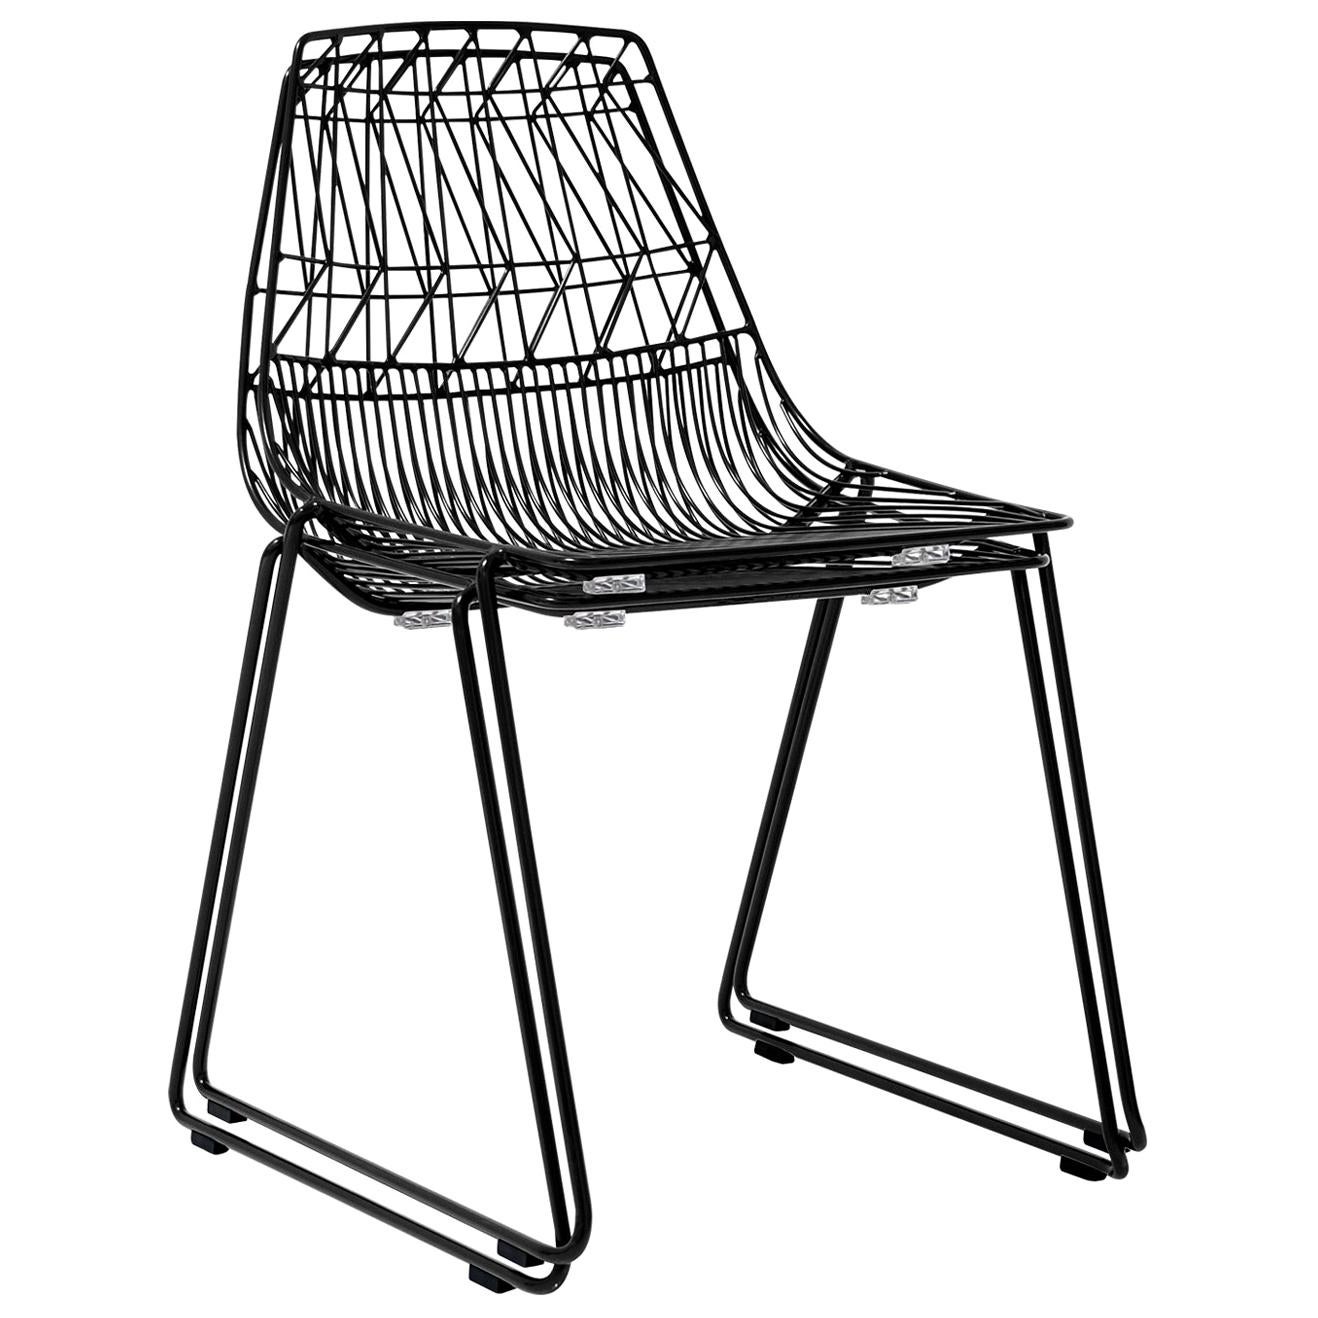 Mid-Century Modern, Minimalist Wire Chair, Stacking Side Chair in Black